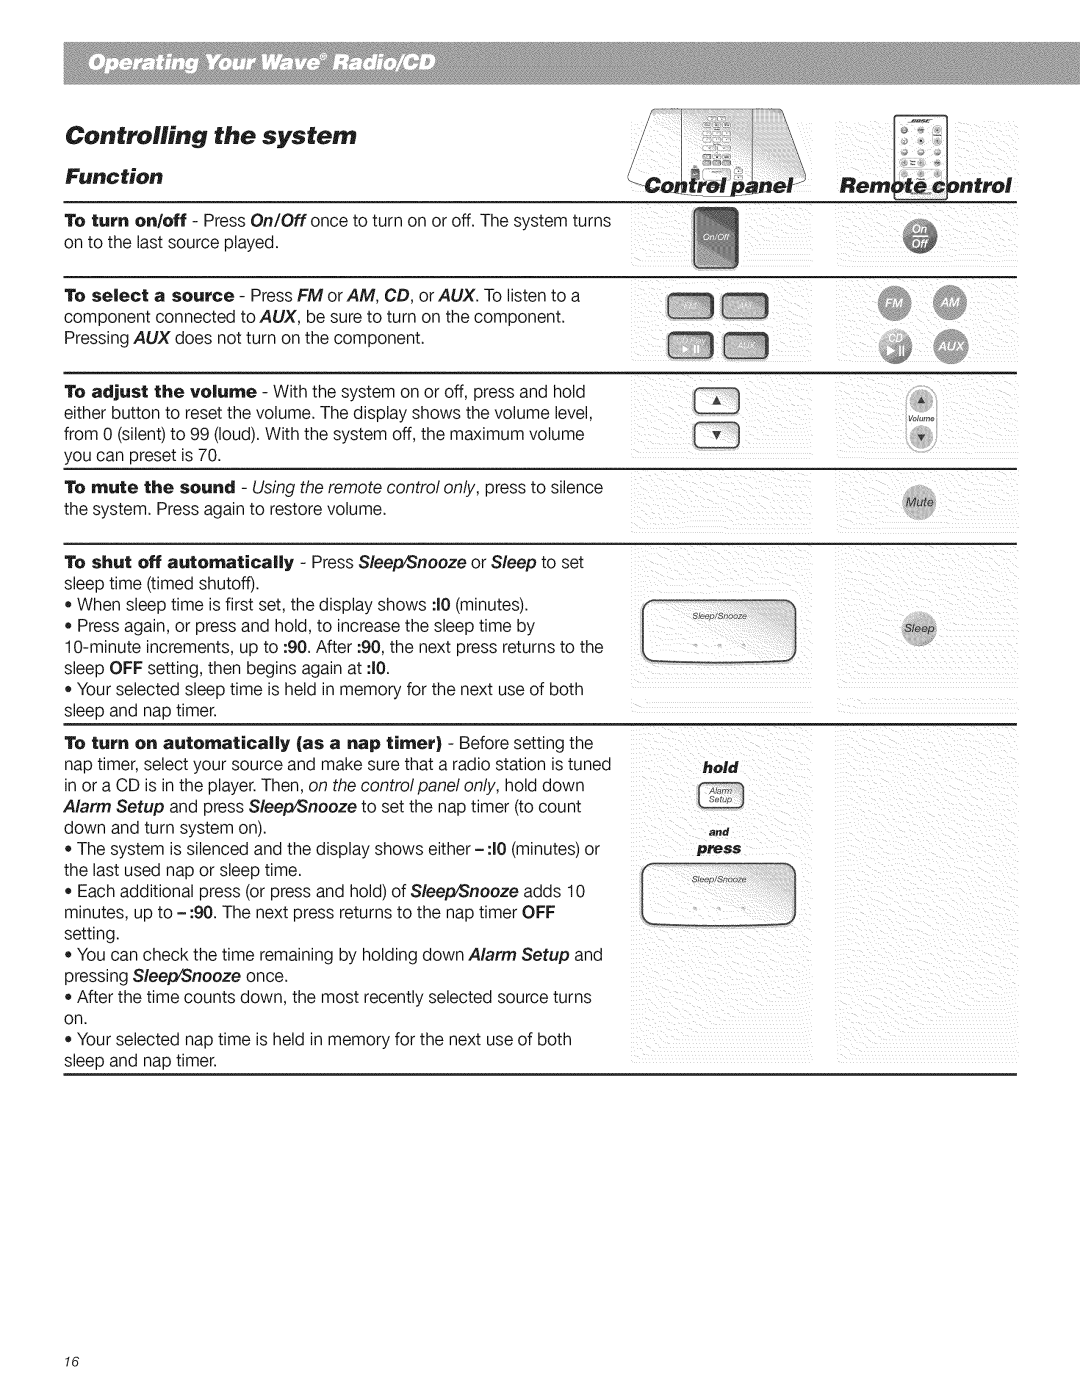 Bose CD Player manual Controlling the system, Function, Rernntrol 